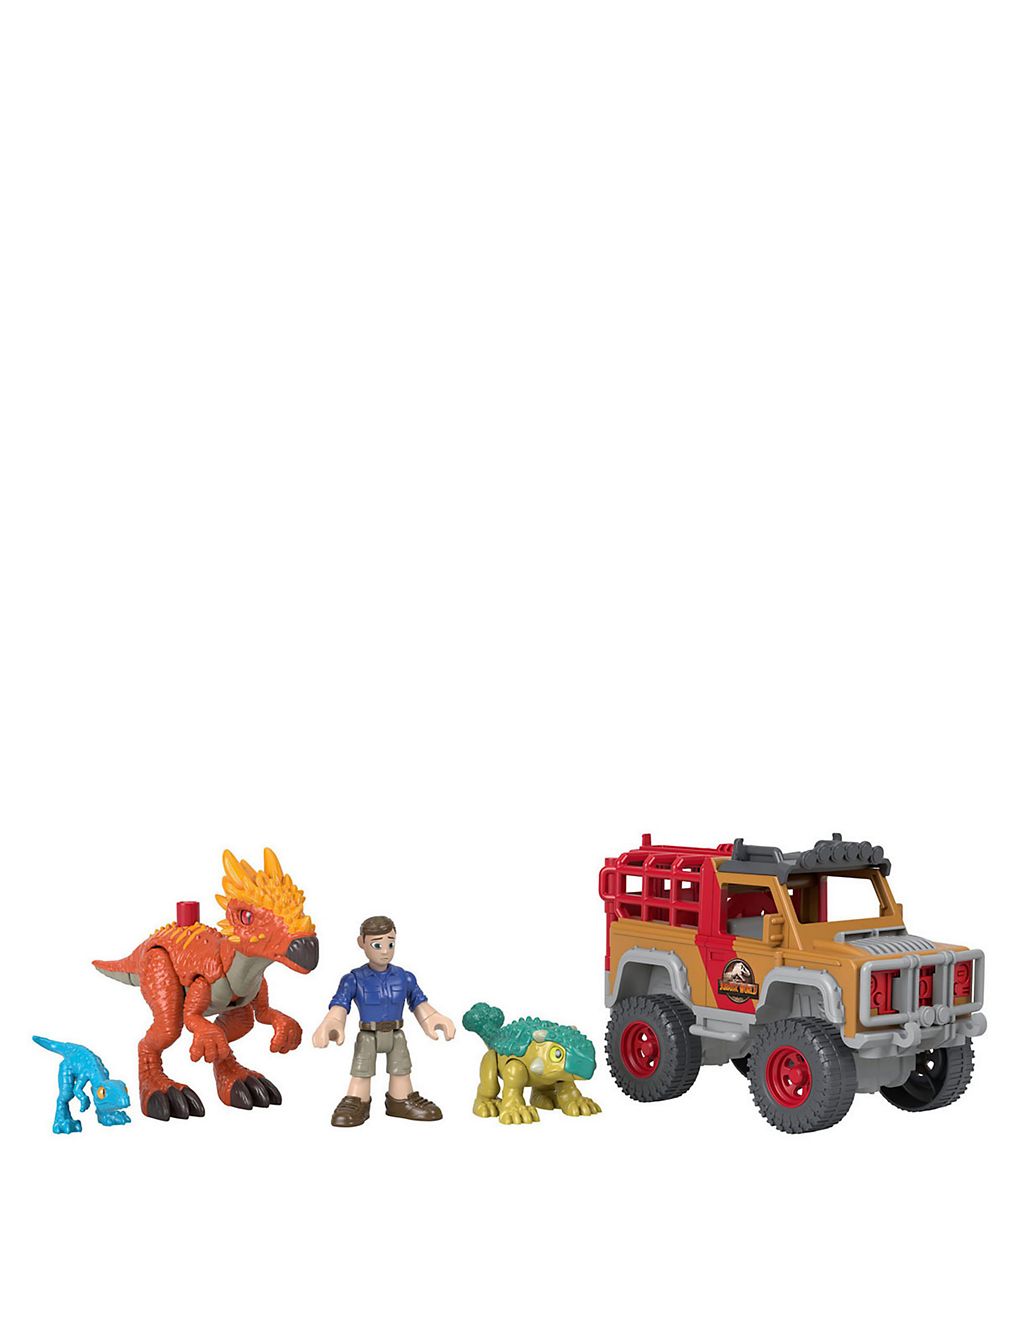 Imaginext: Jurassic World - Camp Cretaceous Vehicle, Figure and Dinos Pack 1 of 4